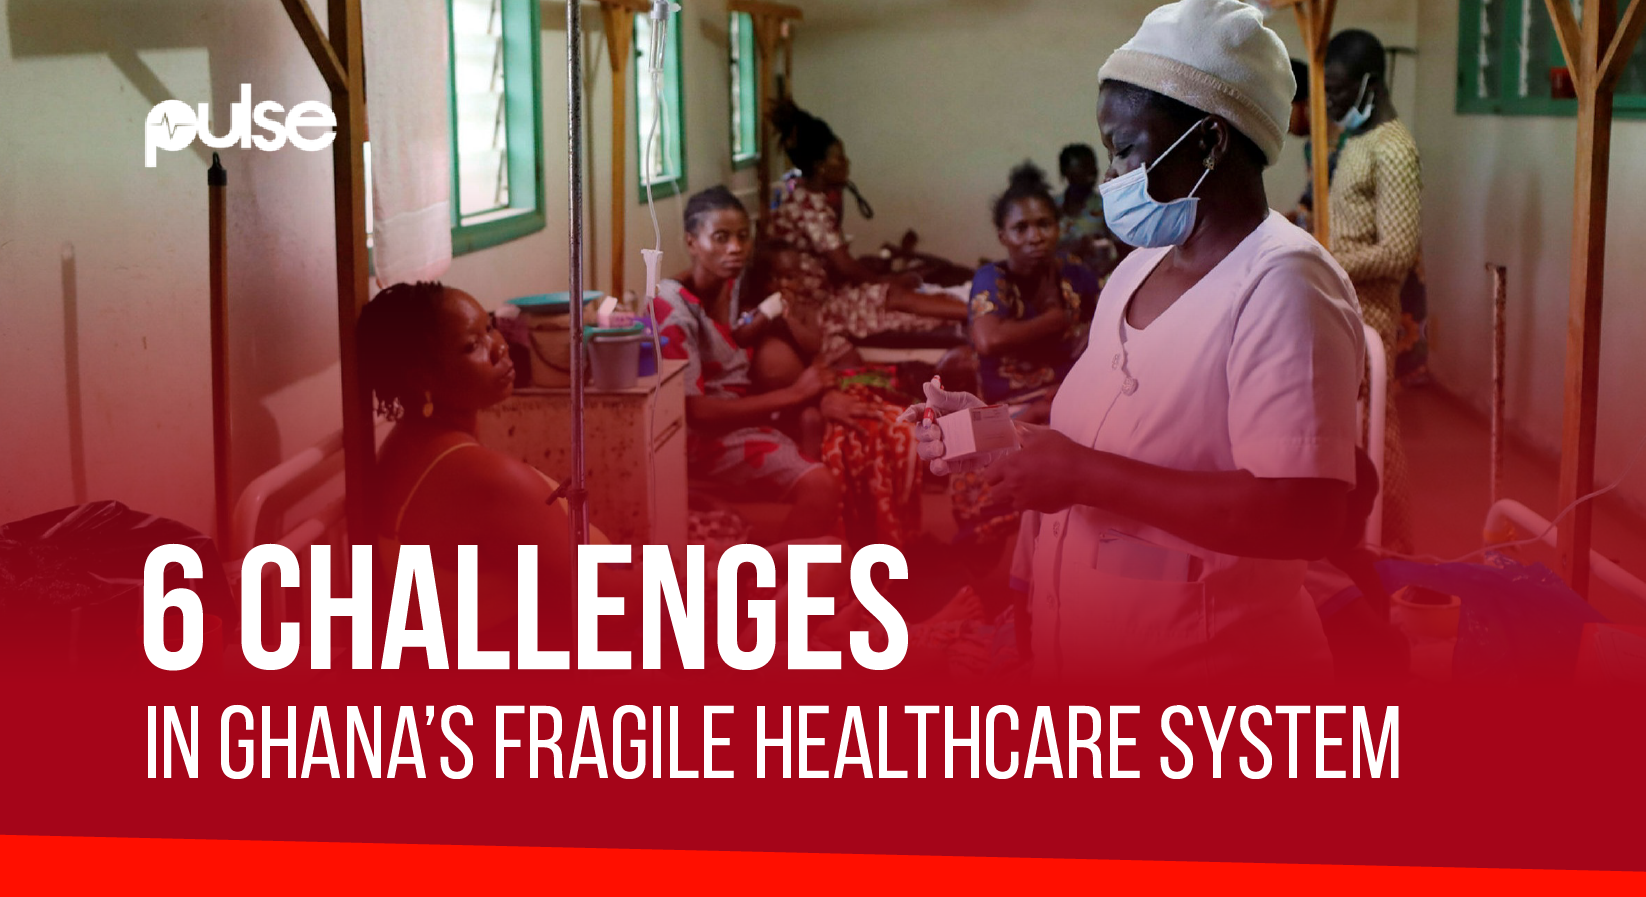 Pulse Cares: 6 challenges in Ghana’s fragile healthcare system